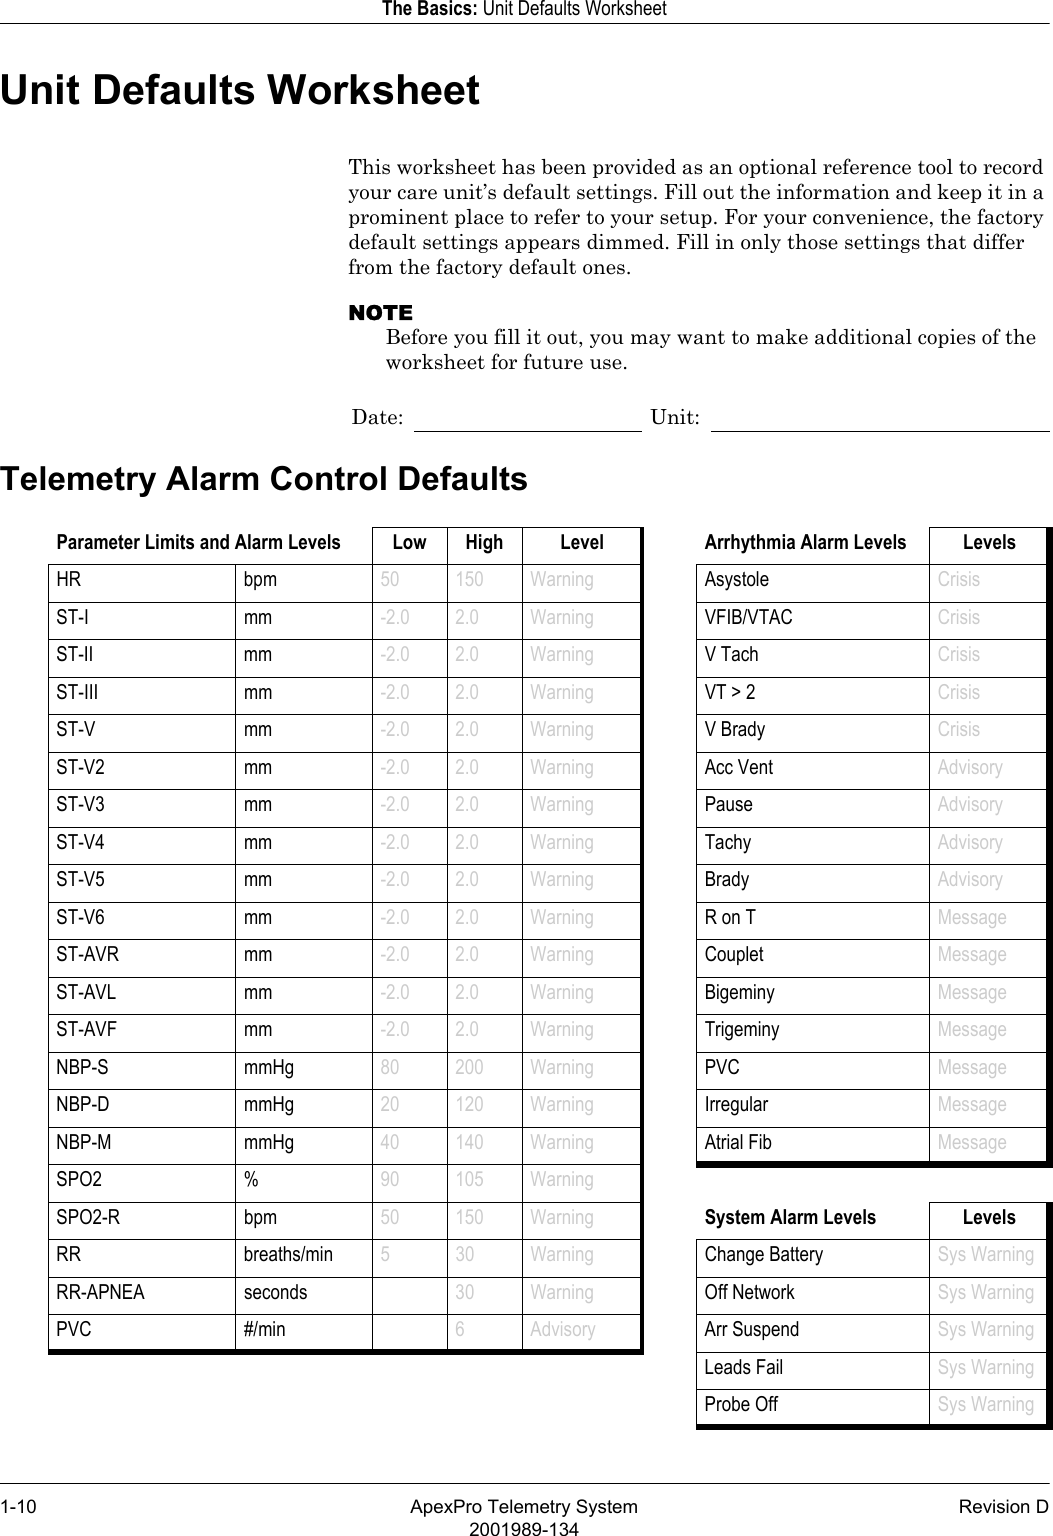 1-10 ApexPro Telemetry System Revision D2001989-134The Basics: Unit Defaults WorksheetUnit Defaults WorksheetThis worksheet has been provided as an optional reference tool to record your care unit’s default settings. Fill out the information and keep it in a prominent place to refer to your setup. For your convenience, the factory default settings appears dimmed. Fill in only those settings that differ from the factory default ones.NOTEBefore you fill it out, you may want to make additional copies of the worksheet for future use.Telemetry Alarm Control DefaultsDate: Unit:Parameter Limits and Alarm Levels Low High Level Arrhythmia Alarm Levels LevelsHR bpm 50 150 Warning Asystole CrisisST-I mm -2.0 2.0 Warning VFIB/VTAC CrisisST-II mm -2.0 2.0 Warning V Tach CrisisST-III mm -2.0 2.0 Warning VT &gt; 2 CrisisST-V mm -2.0 2.0 Warning V Brady CrisisST-V2 mm -2.0 2.0 Warning Acc Vent AdvisoryST-V3 mm -2.0 2.0 Warning Pause AdvisoryST-V4 mm -2.0 2.0 Warning Tachy AdvisoryST-V5 mm -2.0 2.0 Warning Brady AdvisoryST-V6 mm -2.0 2.0 Warning R on T MessageST-AVR mm -2.0 2.0 Warning Couplet MessageST-AVL mm -2.0 2.0 Warning Bigeminy MessageST-AVF mm -2.0 2.0 Warning Trigeminy MessageNBP-S mmHg 80 200 Warning PVC MessageNBP-D mmHg 20 120 Warning Irregular MessageNBP-M mmHg 40 140 Warning Atrial Fib MessageSPO2 % 90 105 WarningSPO2-R bpm 50 150 Warning System Alarm Levels LevelsRR breaths/min 5 30 Warning Change Battery Sys WarningRR-APNEA seconds 30 Warning Off Network Sys WarningPVC #/min 6 Advisory Arr Suspend Sys WarningLeads Fail Sys WarningProbe Off Sys Warning